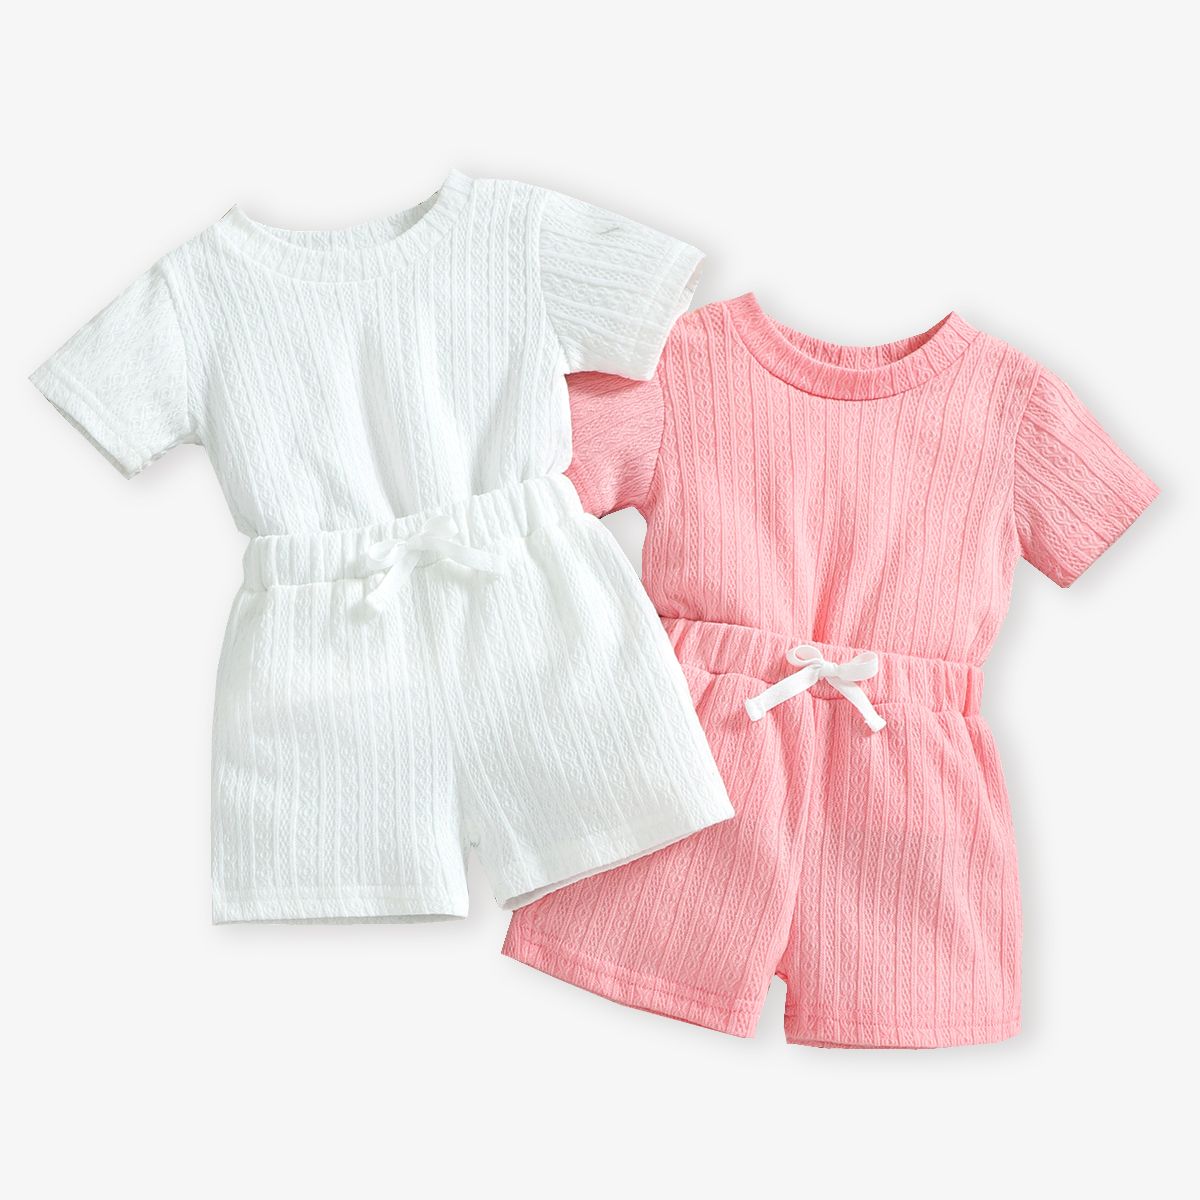 2pcs Baby Boy/Girl Solid Cable Knit Short Tee and Shorts Set